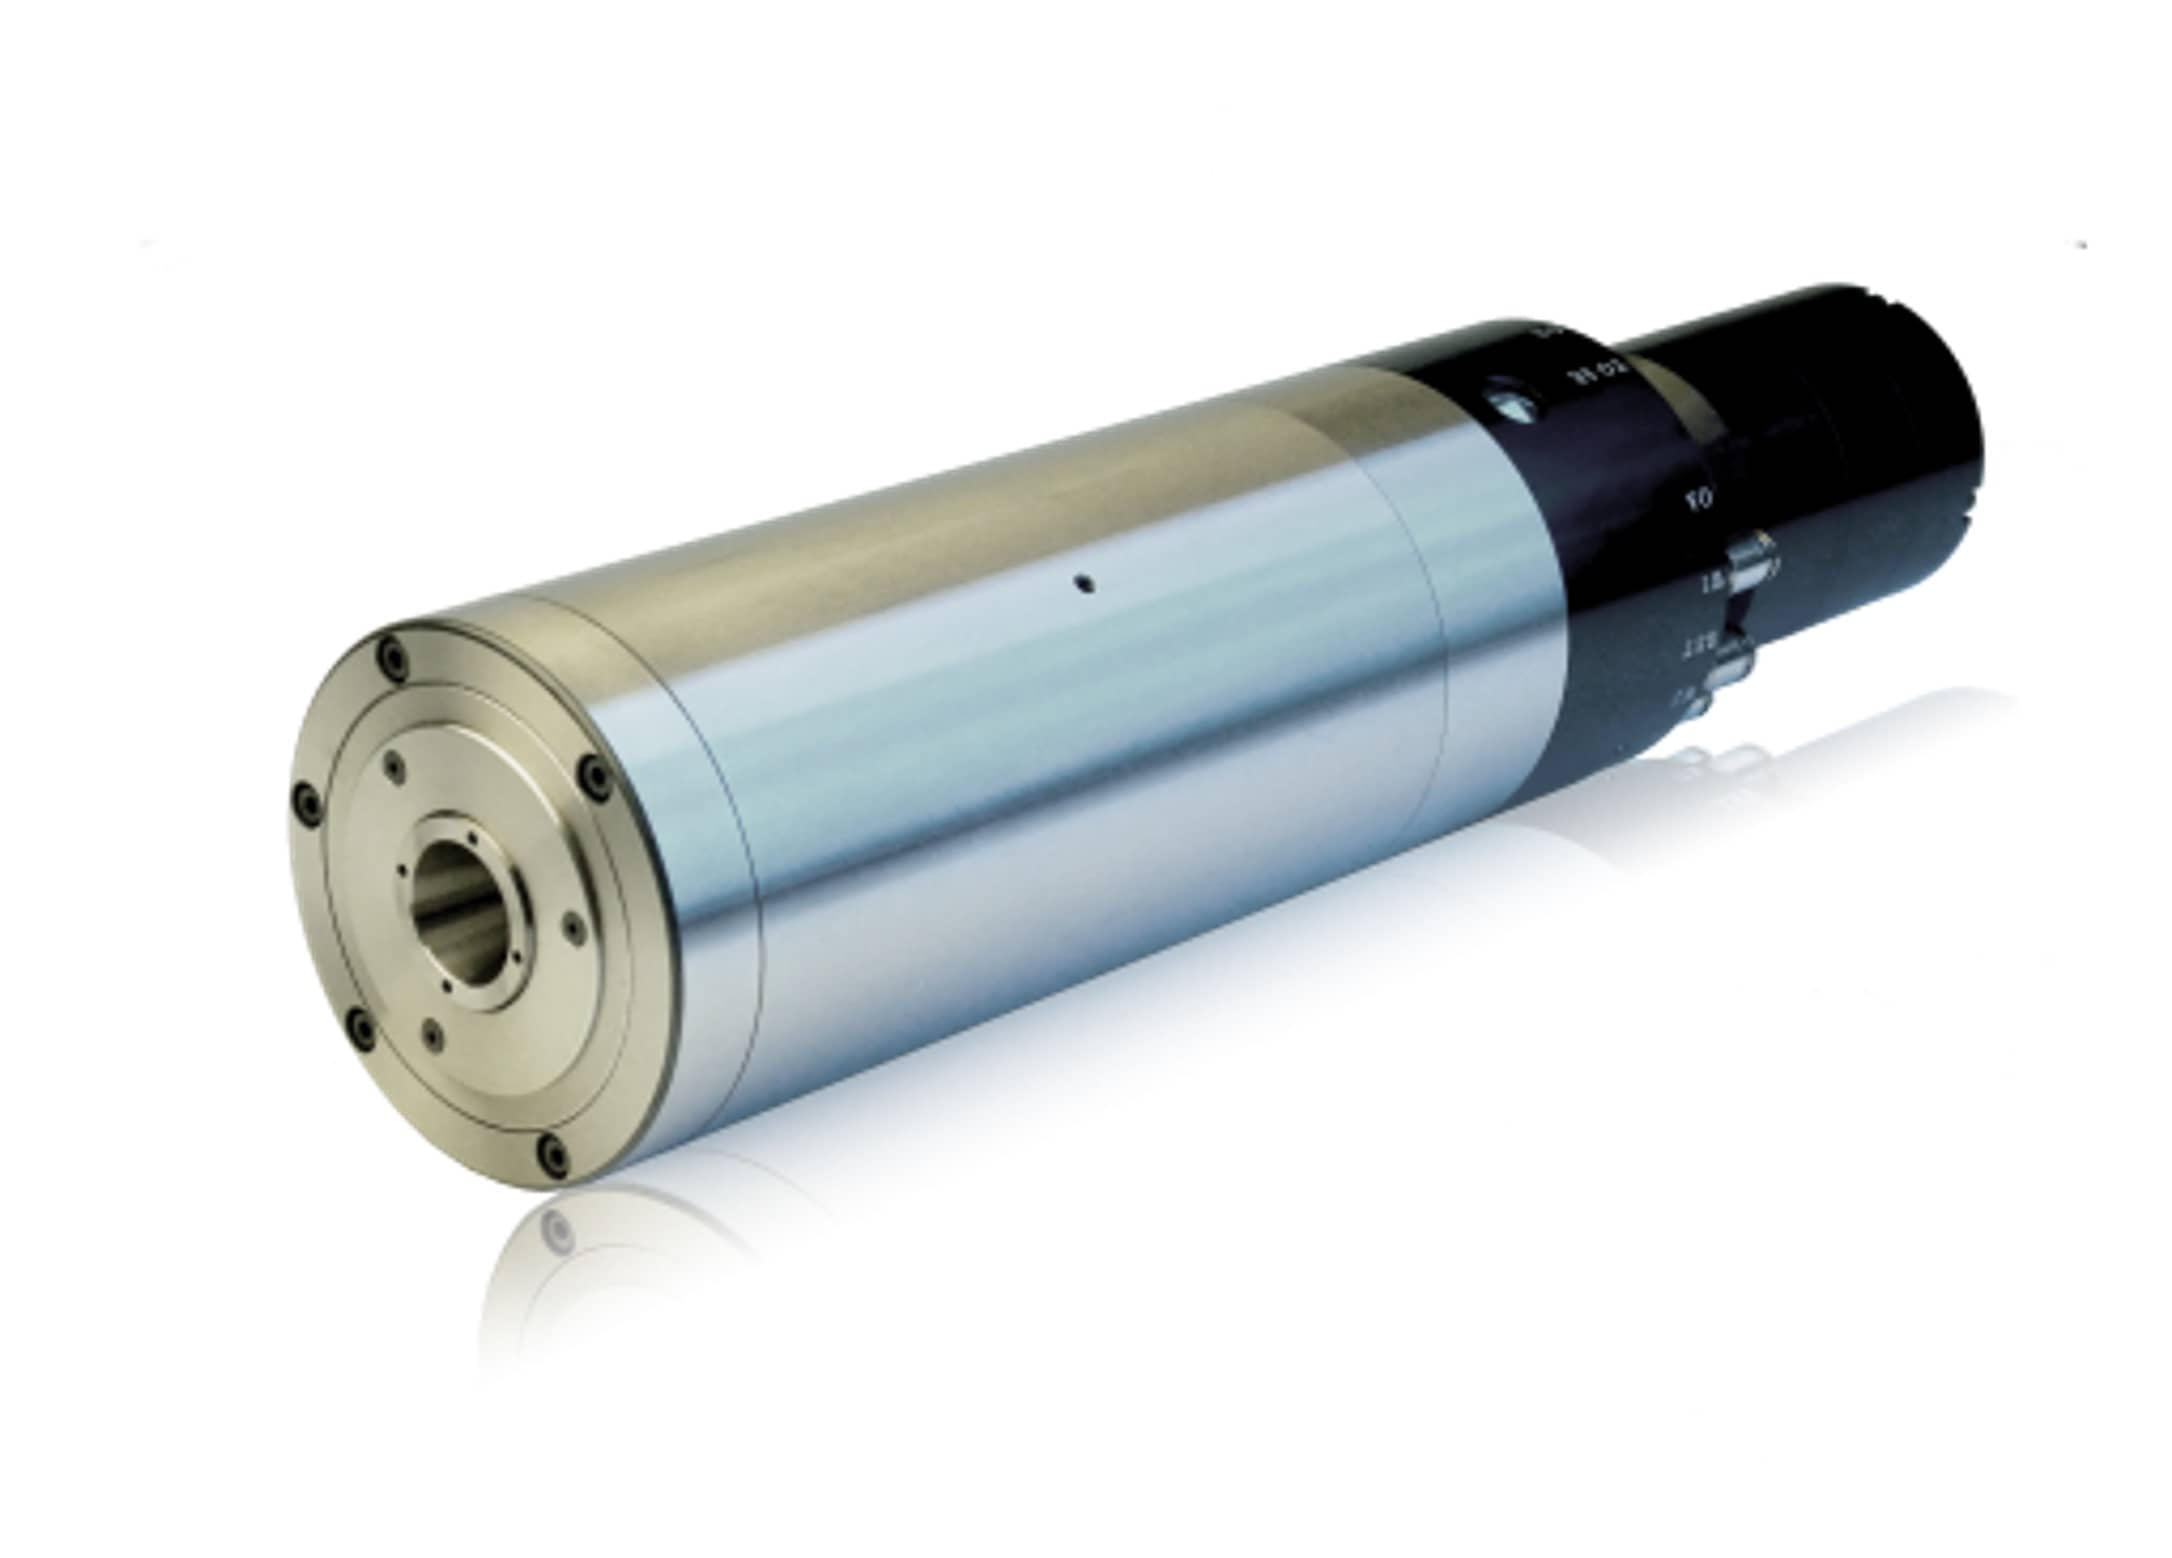 Products|SY-100 Engraving Built-in motor spindle